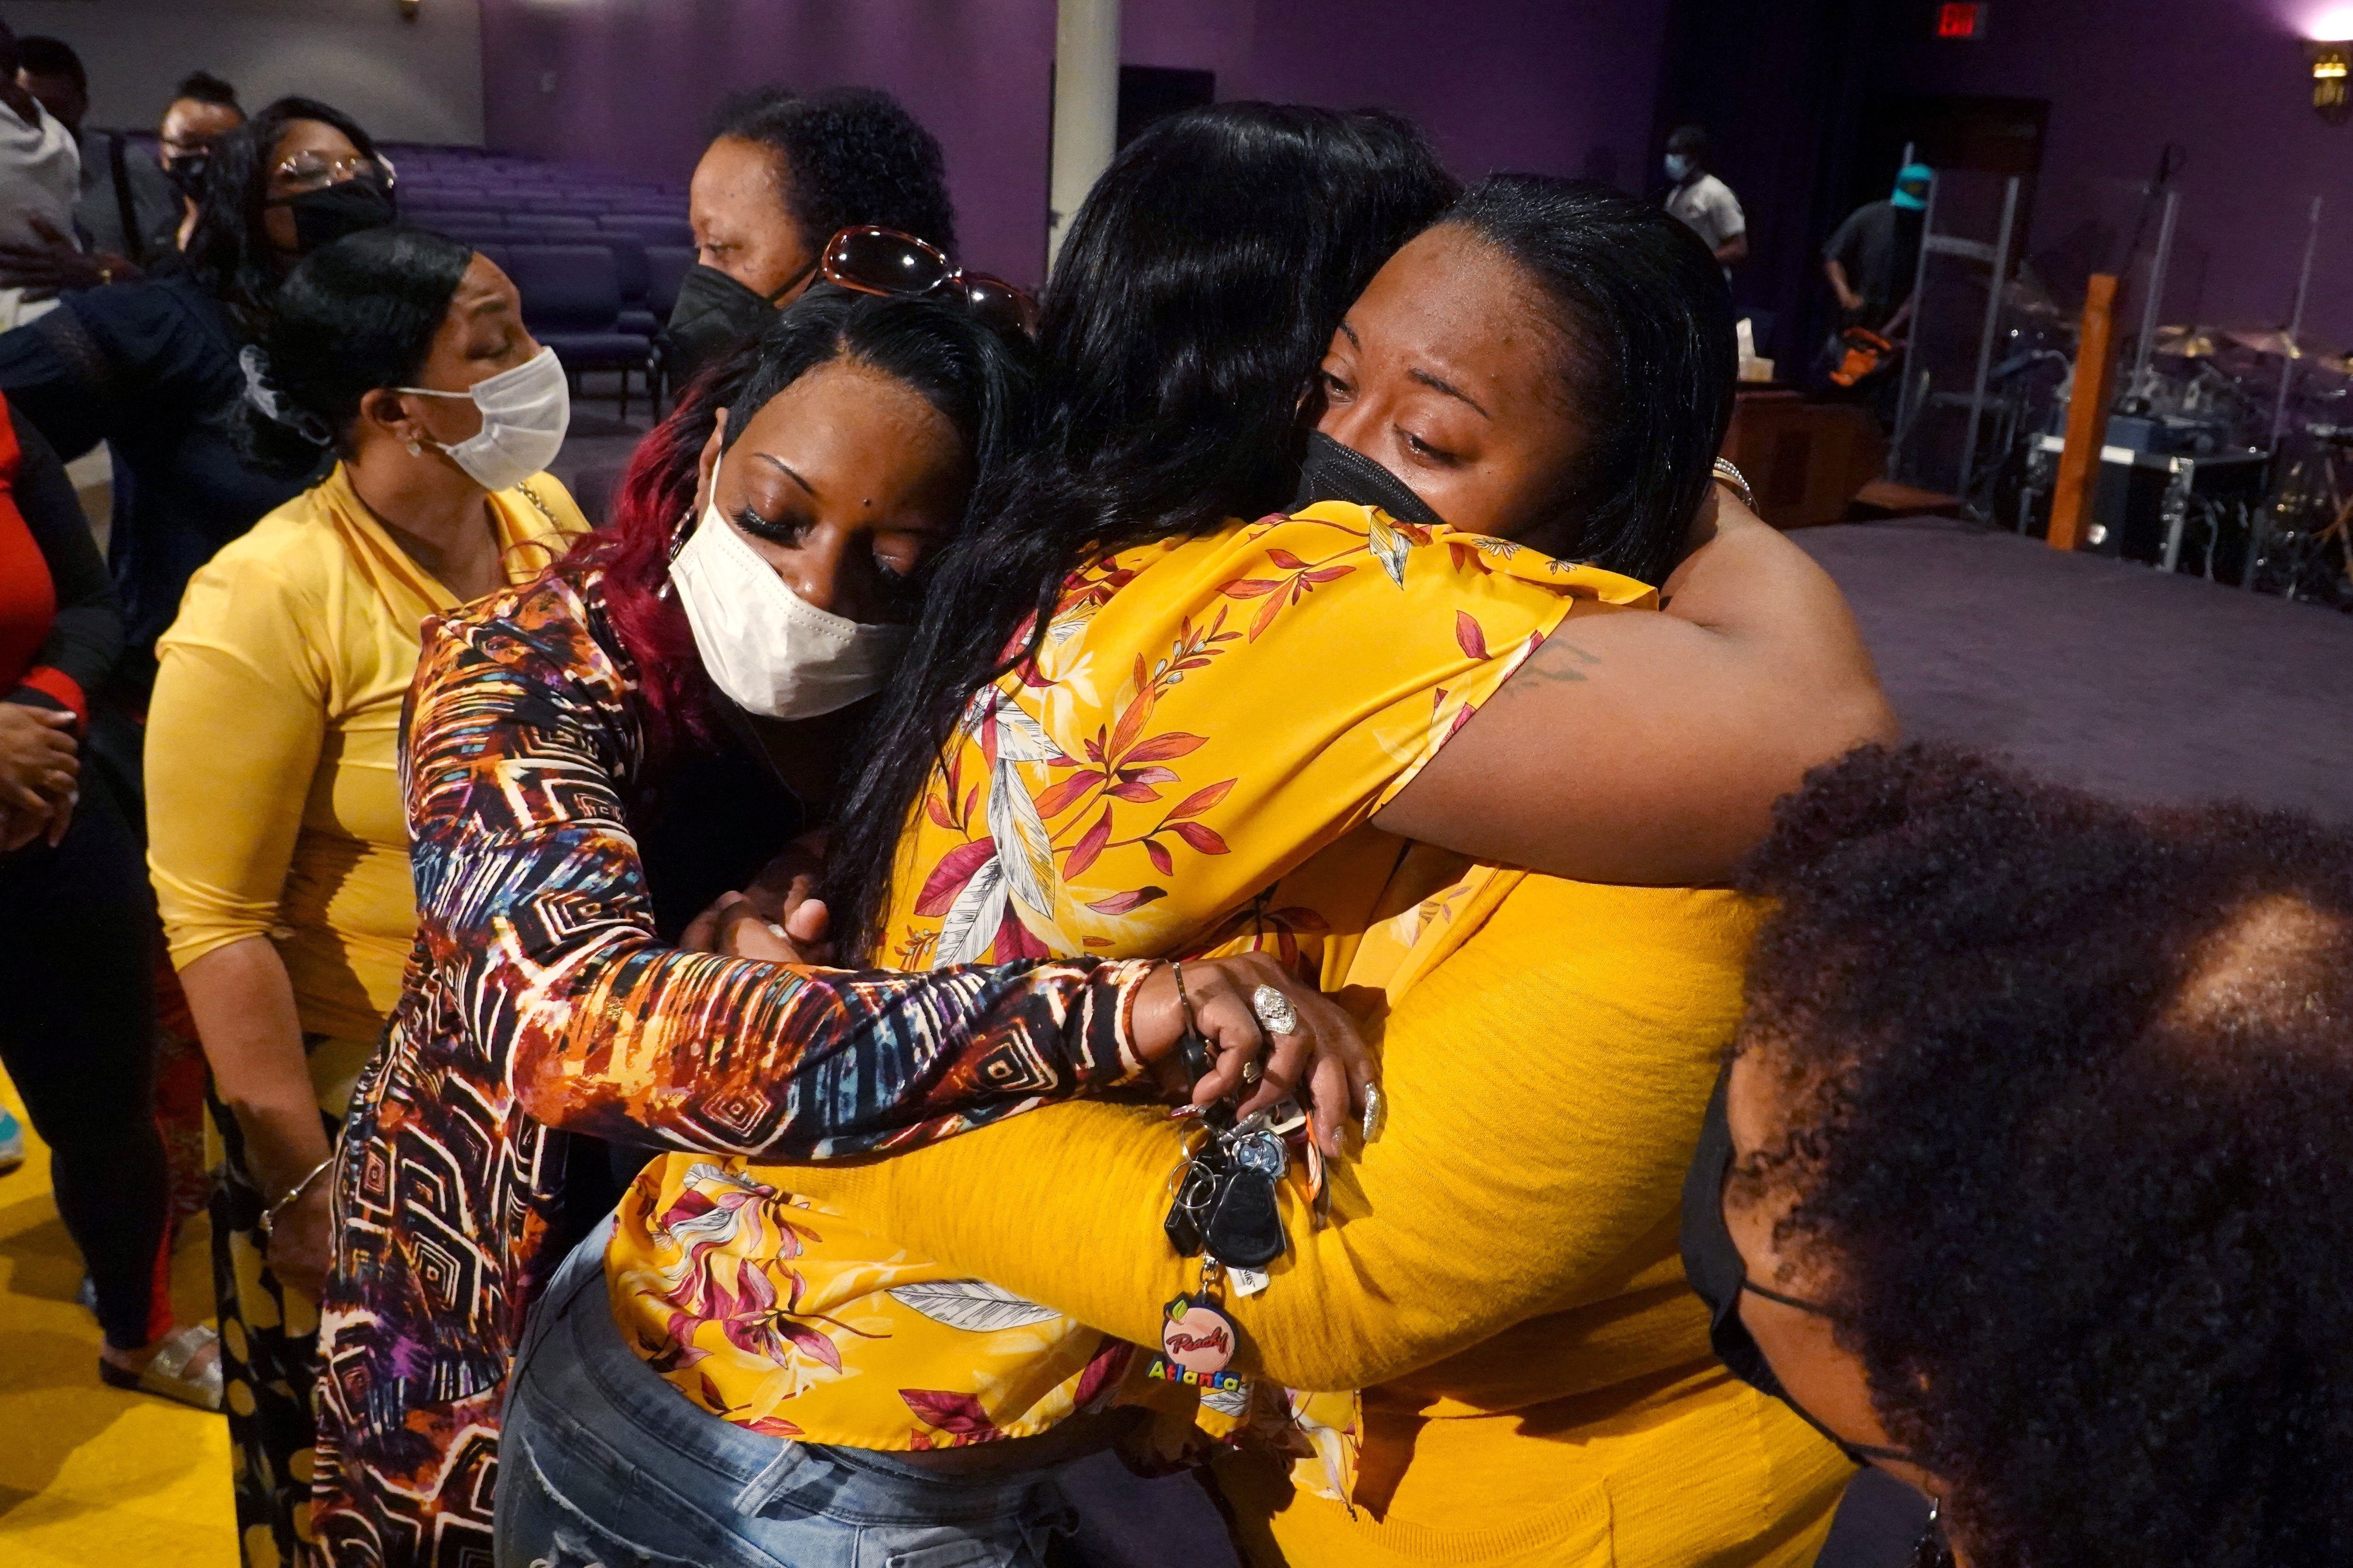 Latisha (R), a clerk at Tops market, who called 911 when when a gunman opened fire at the store, is consoled during services at True Bethel Baptist Churc